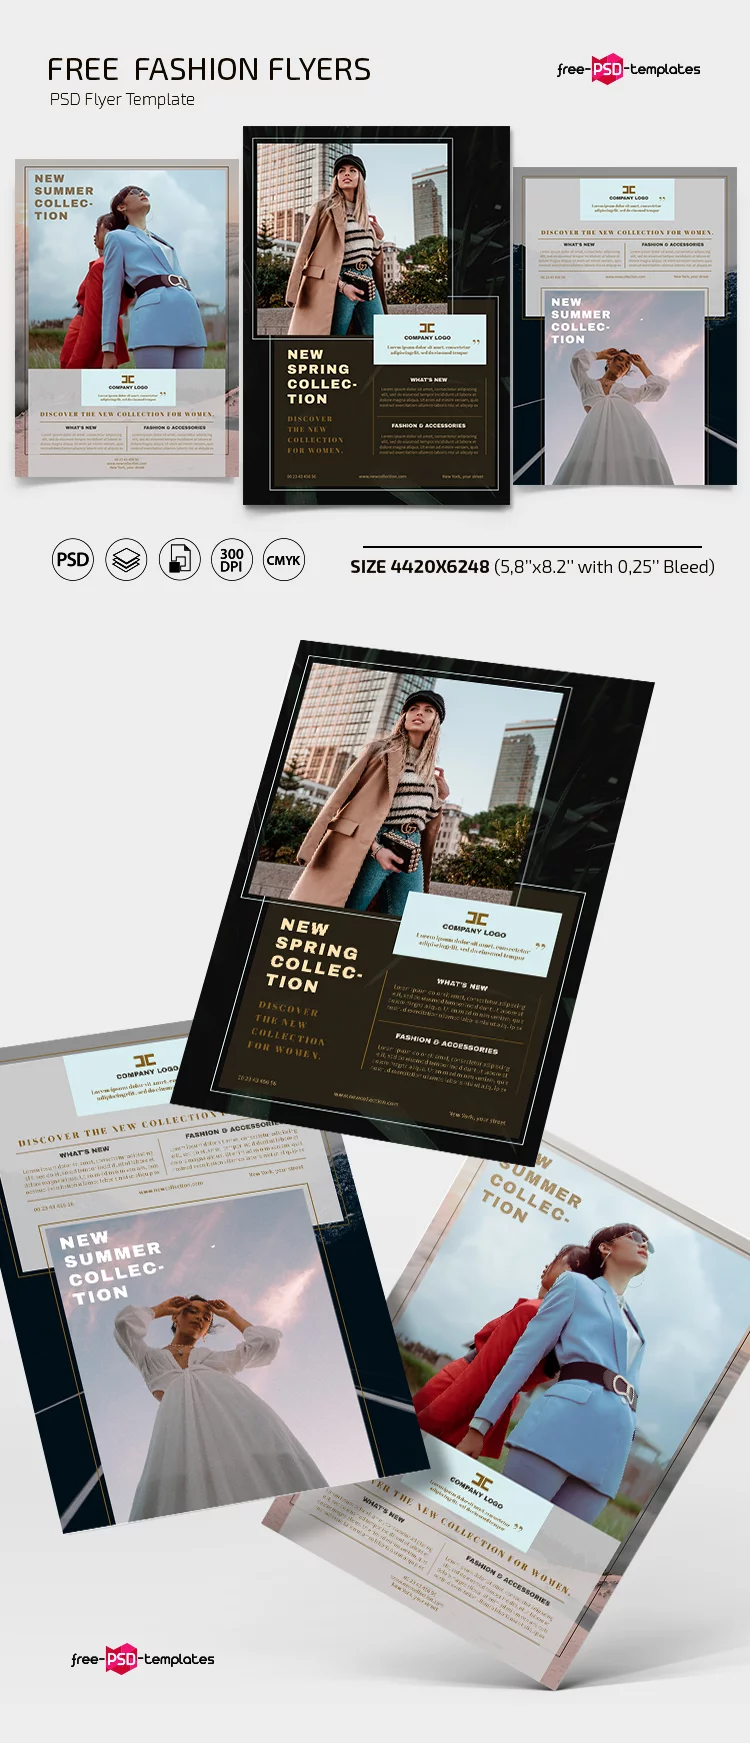 Free Fashion Flyers Template